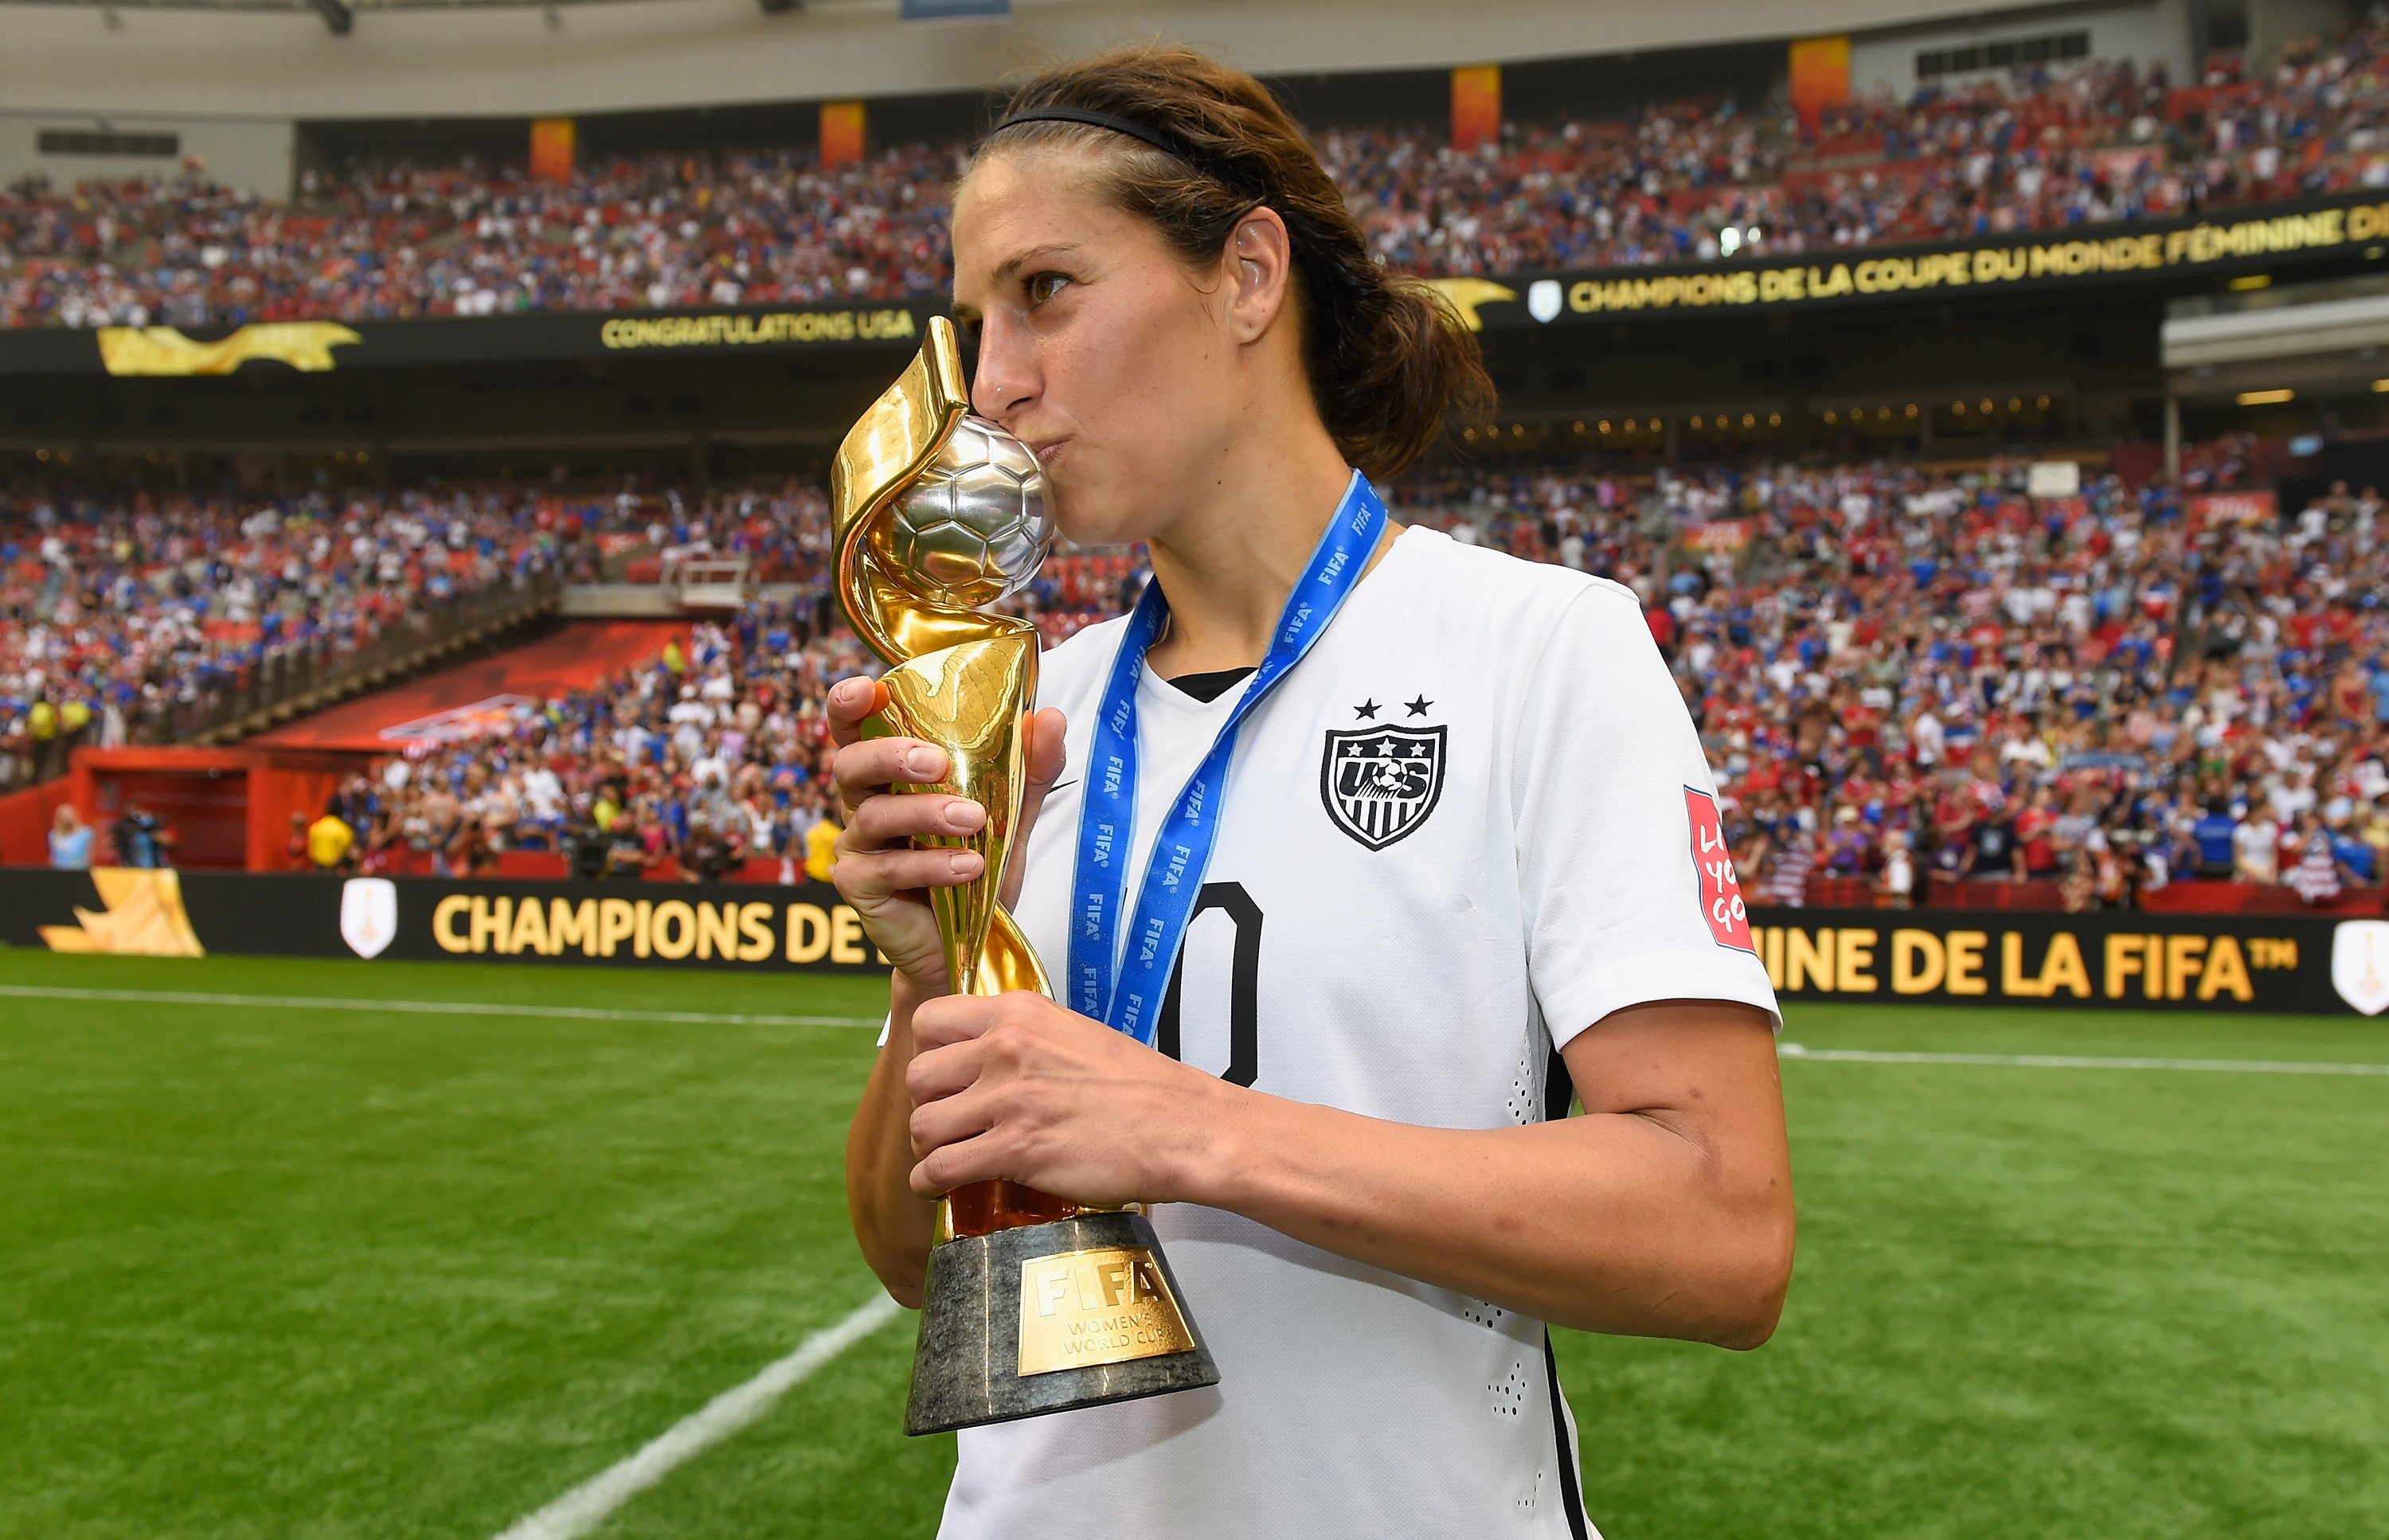 The story of Carli Lloyd's rise to World Cup hero